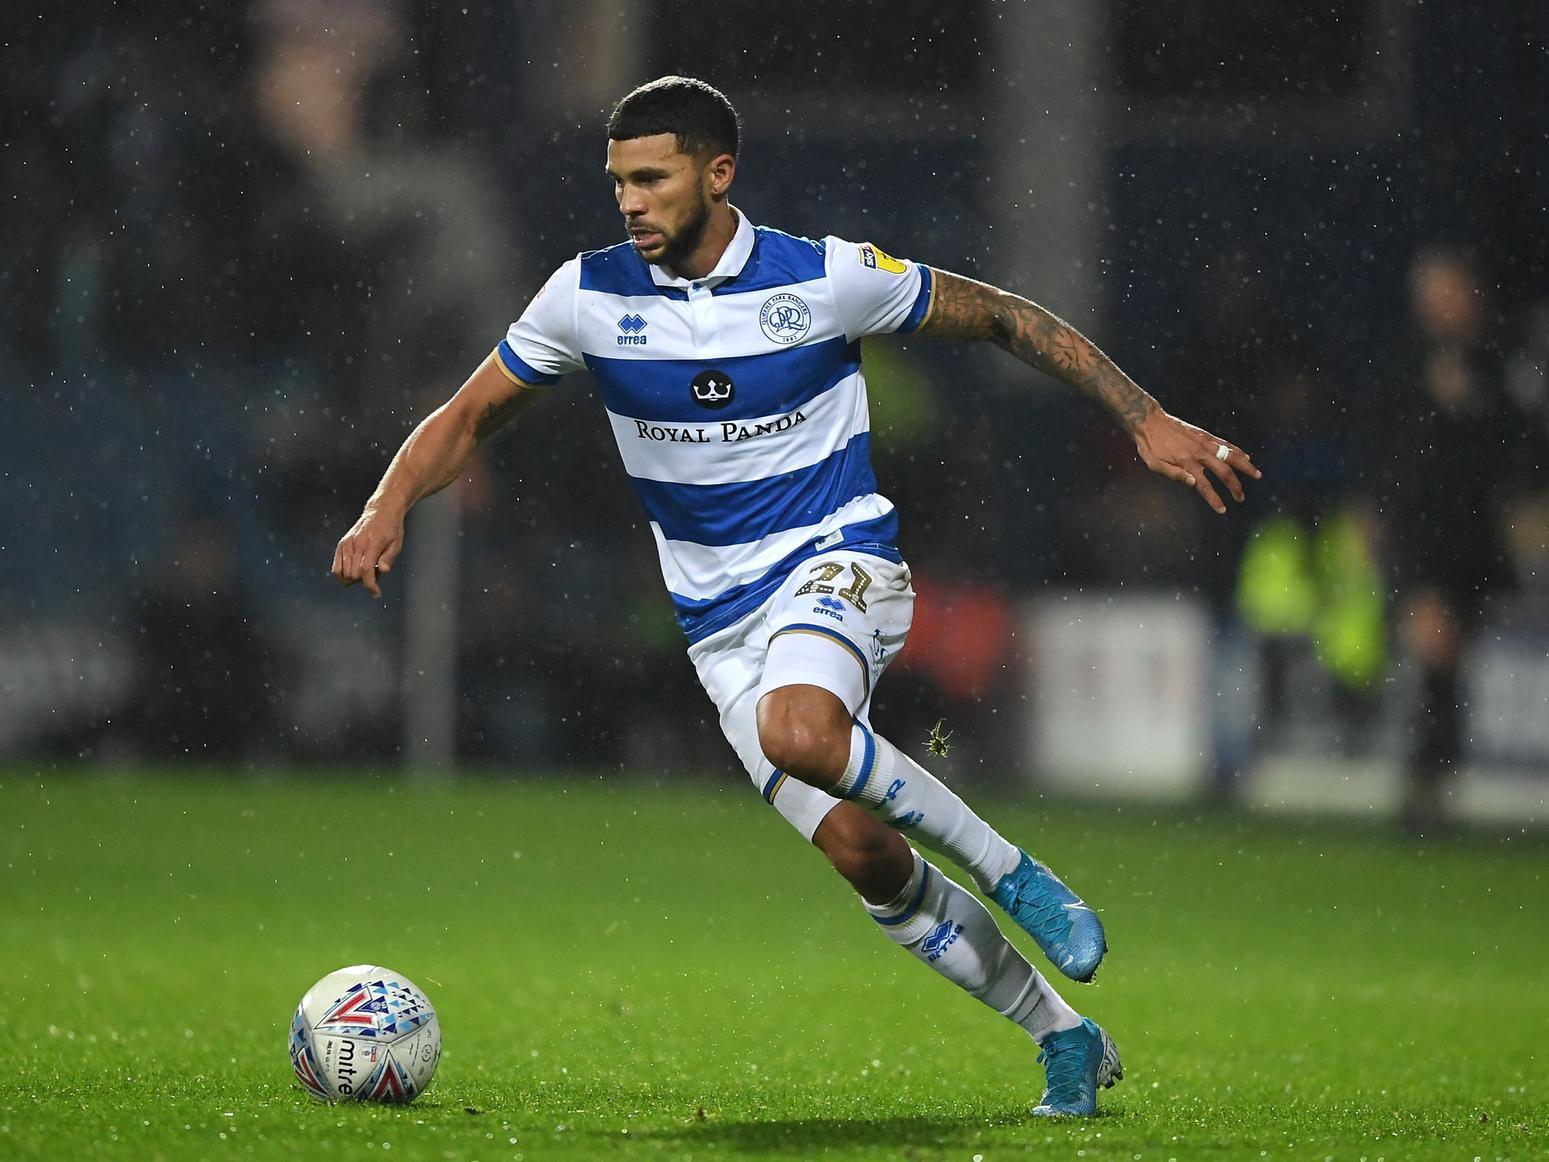 Nahki Wells says his Burnley future is unclear as he made it 13 goals for the season on loan at Queens Park Rangers. (Lancashire Telegraph